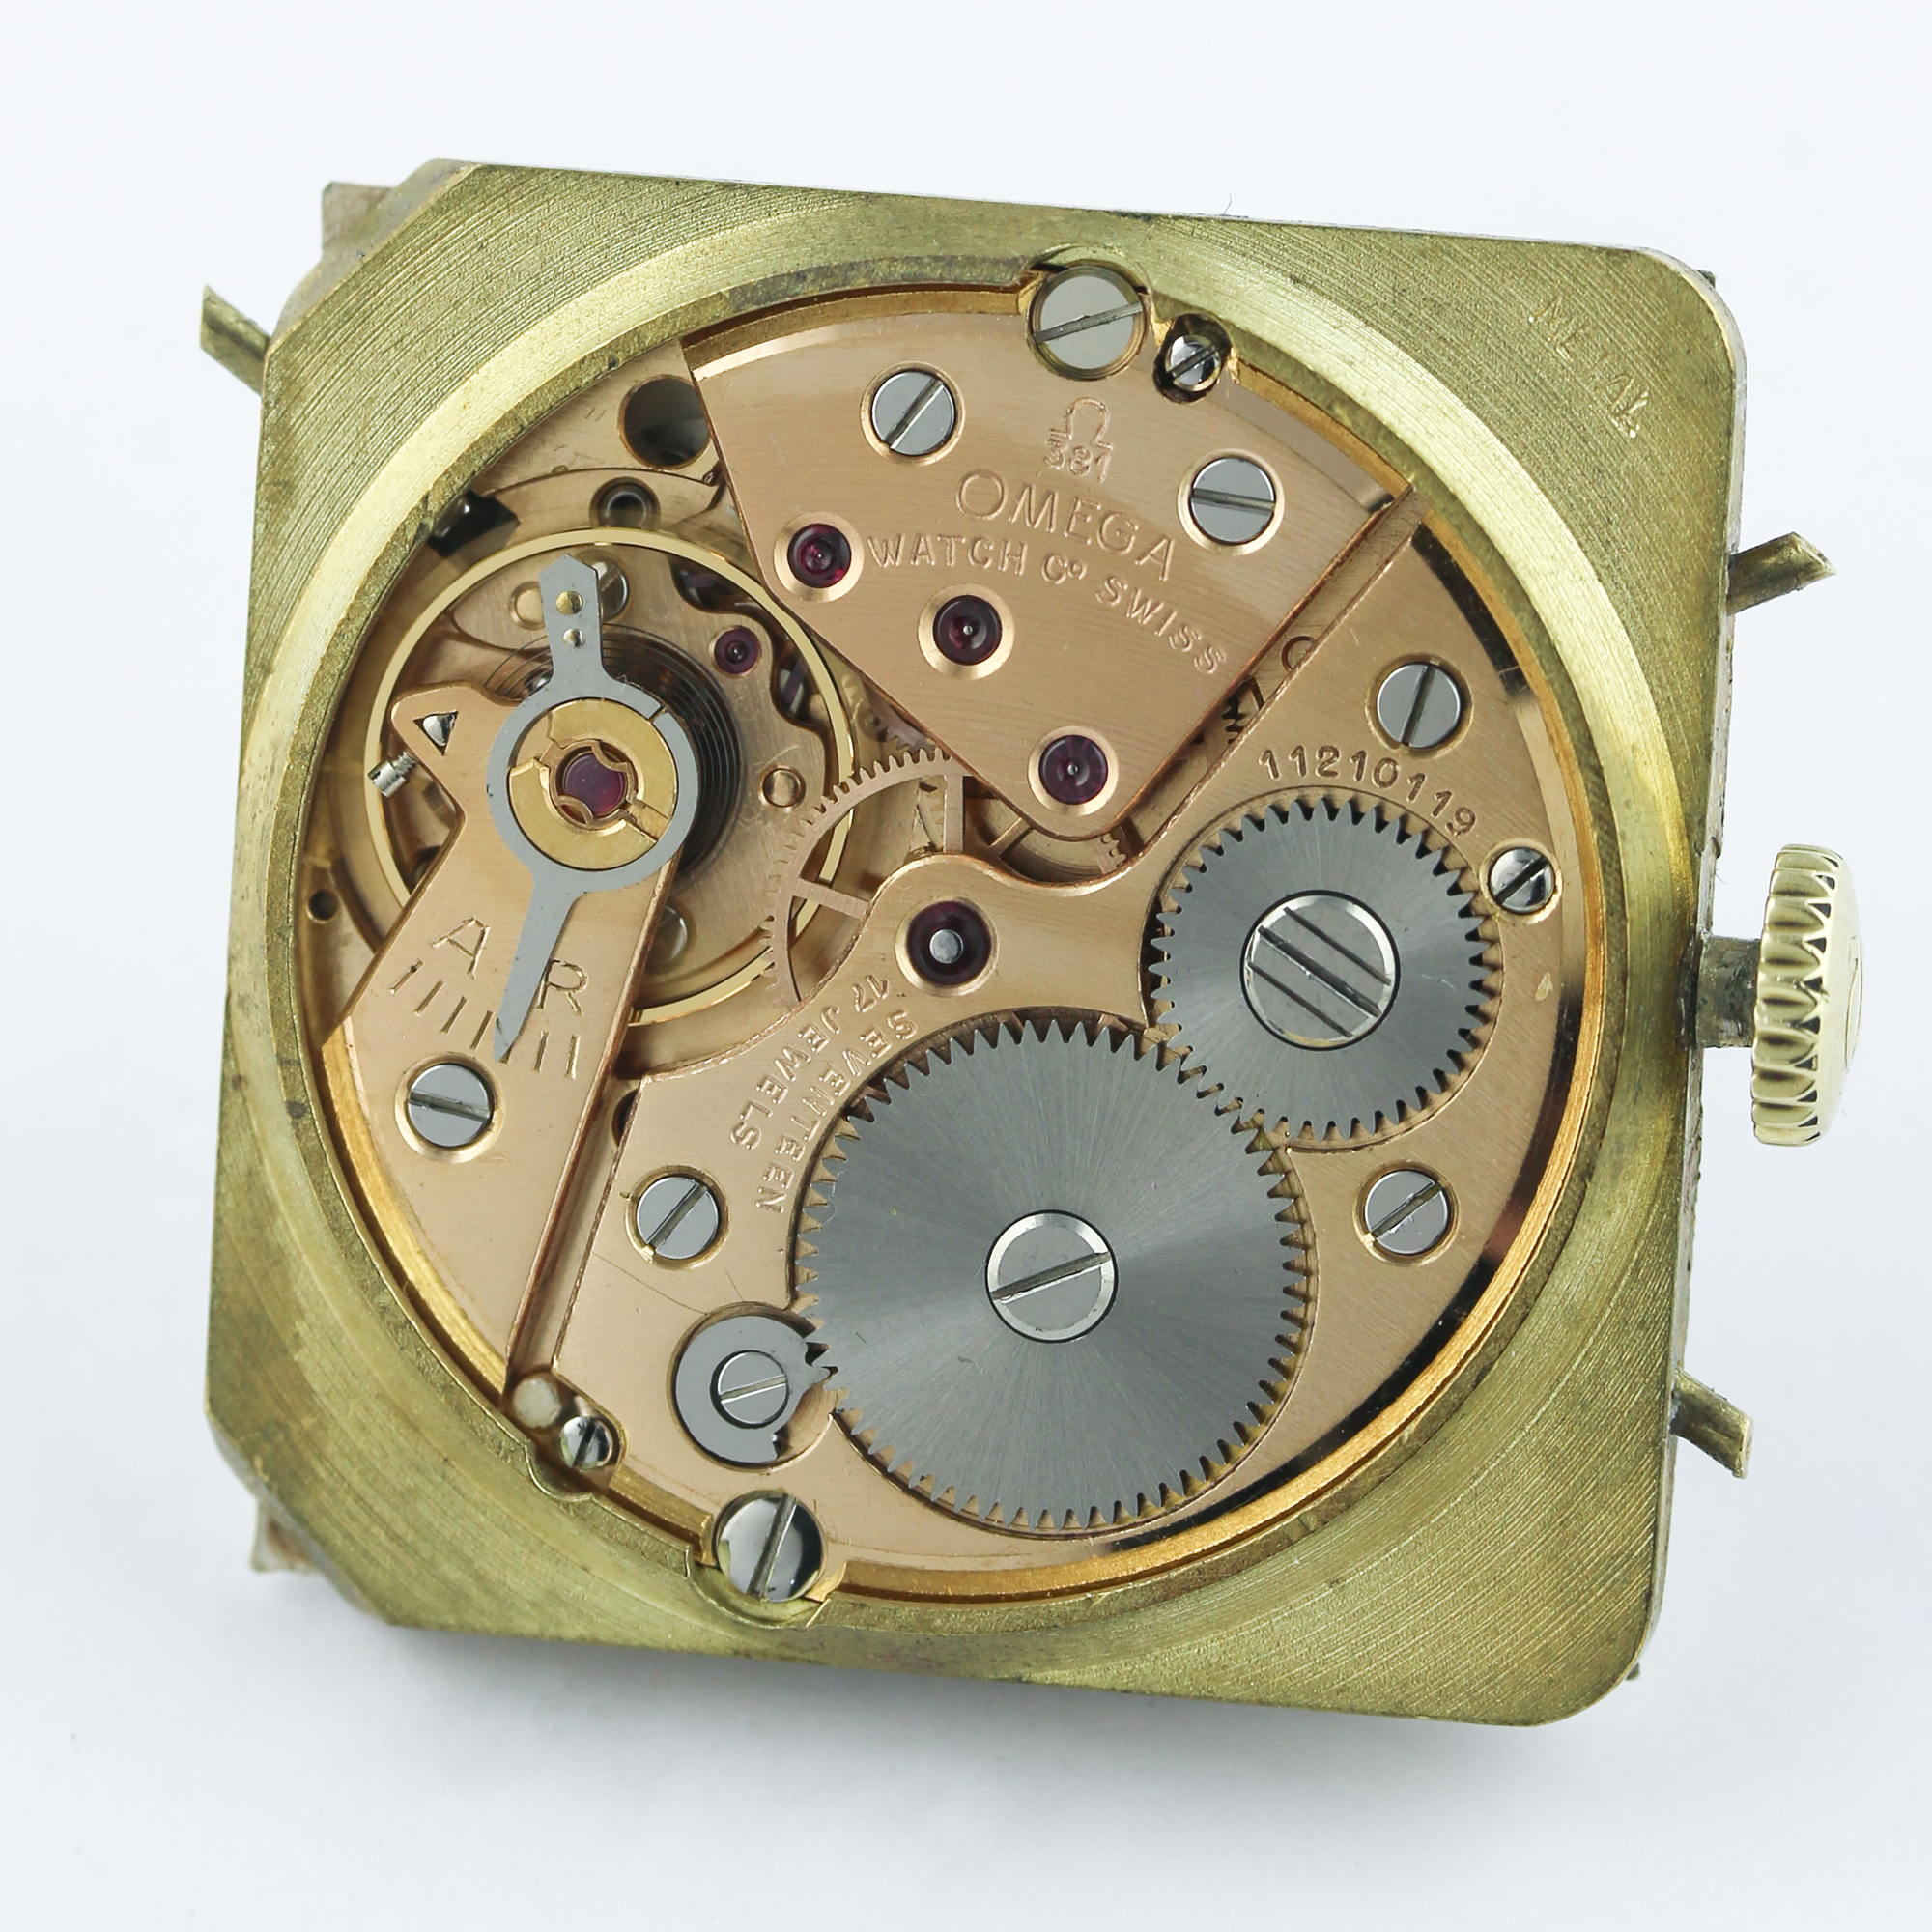 A RARE GENTLEMAN'S 18K SOLID GOLD OMEGA COSMIC MOONPHASE TRIPLE CALENDAR WRIST WATCH CIRCA 1951 D: - Image 8 of 9